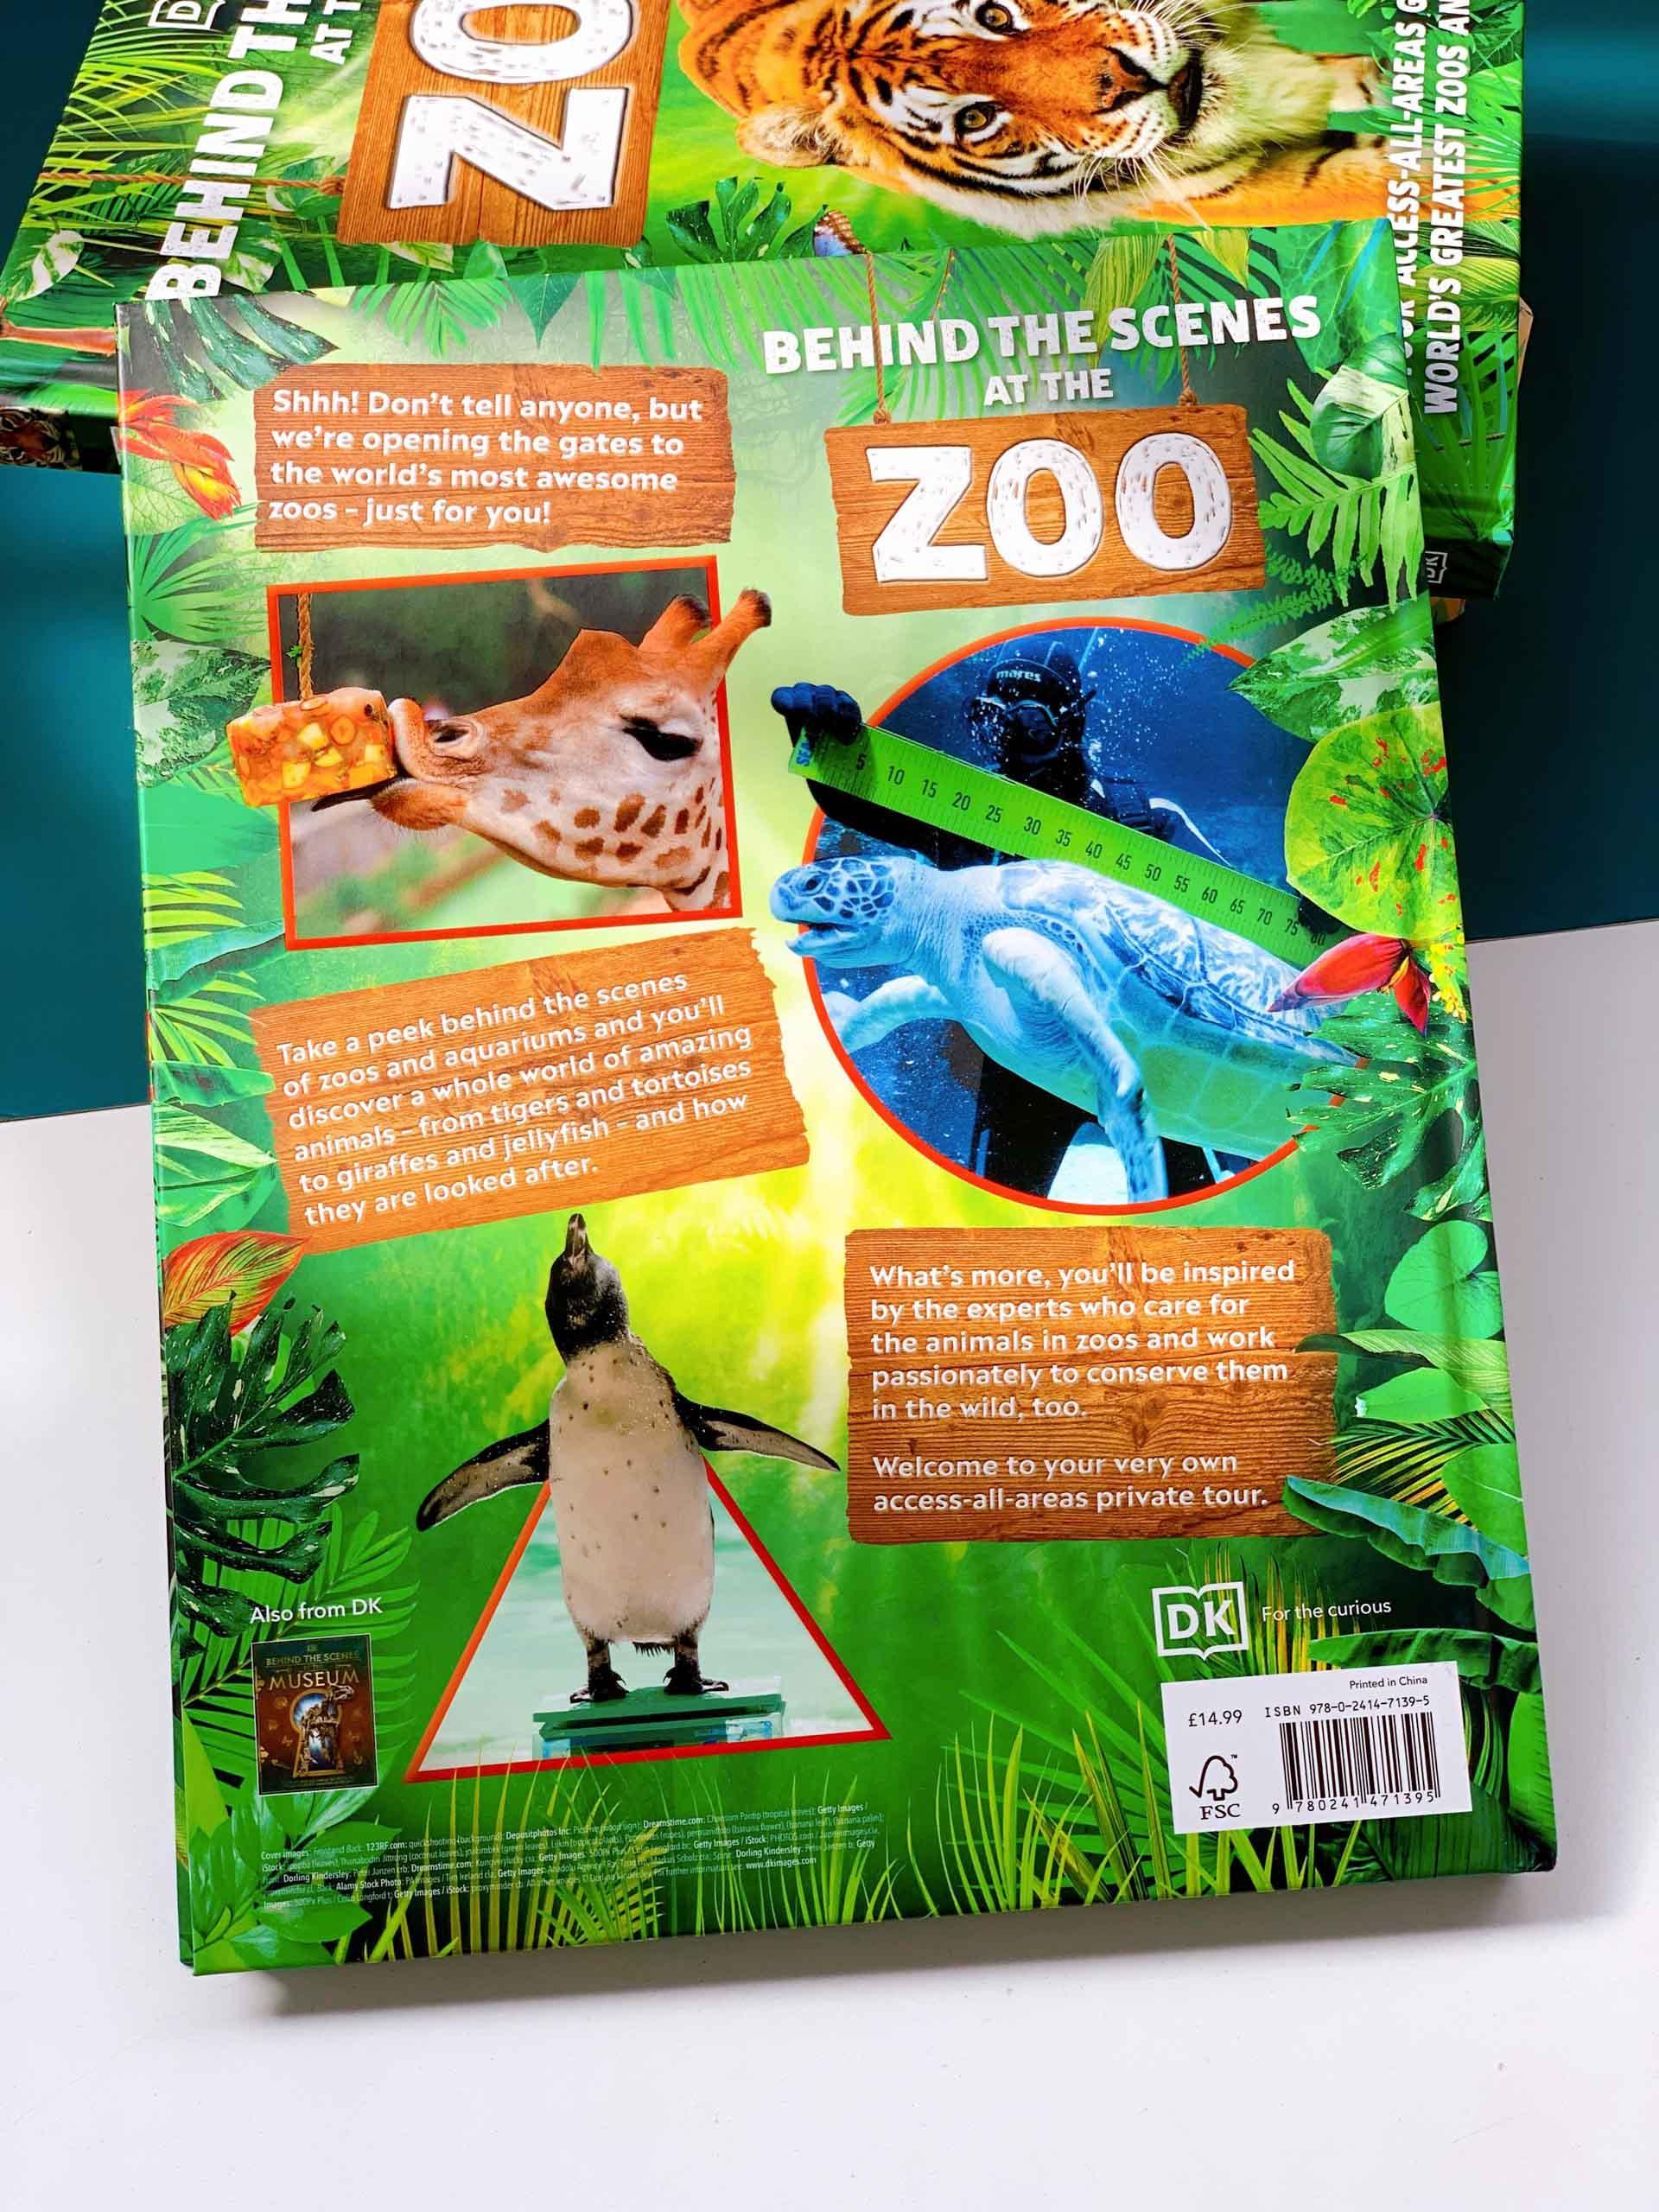 Behind the Scenes at the Zoo : Your Access-All-Areas Guide to the World's Greatest Zoos and Aquariums